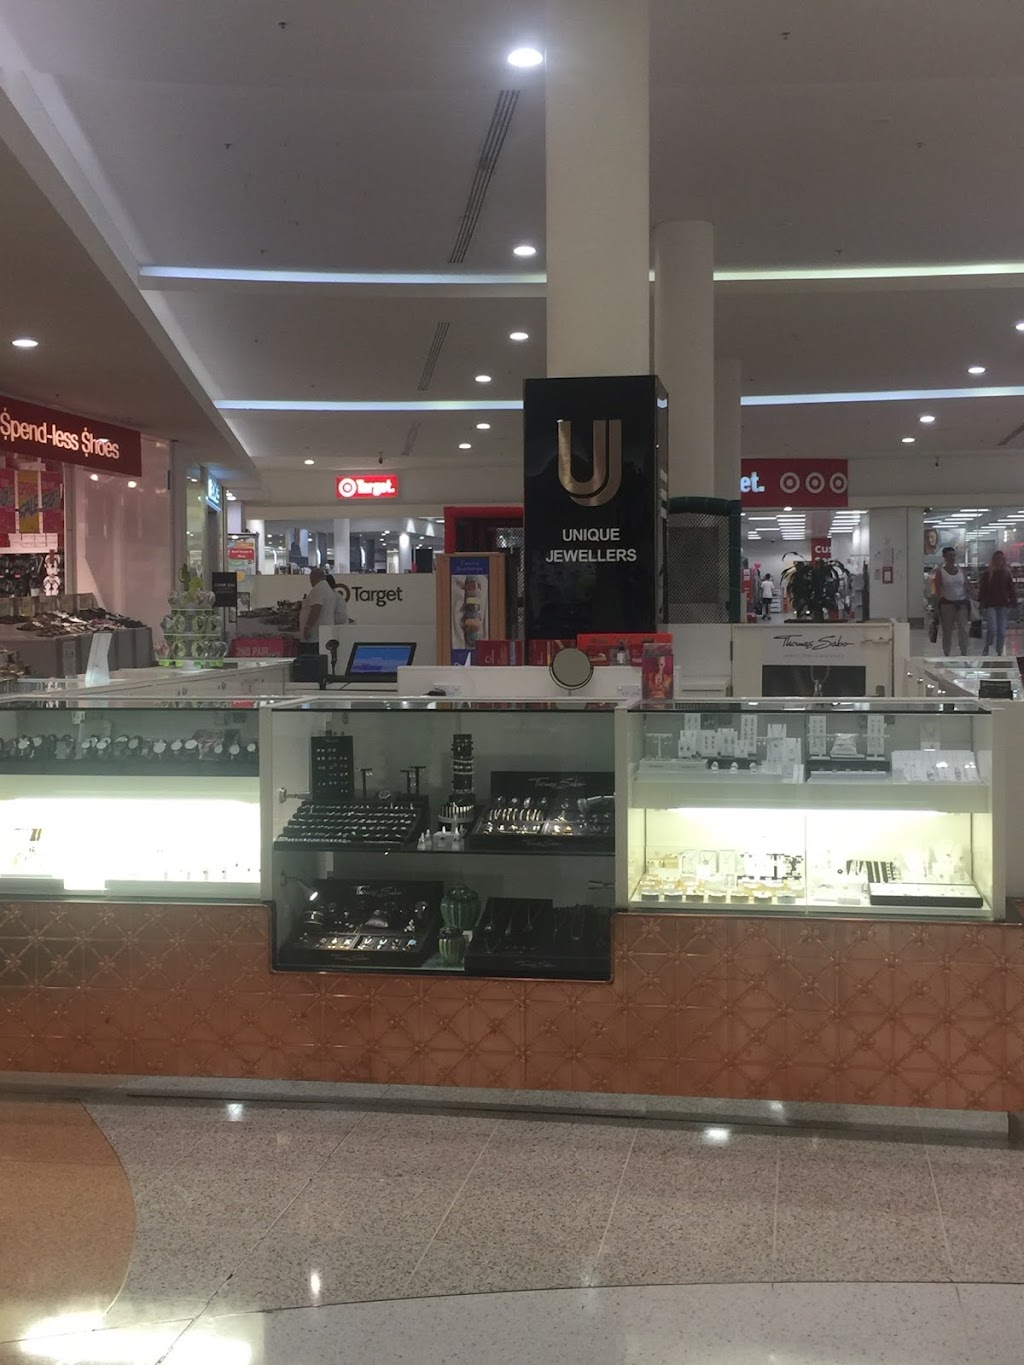 Unique Jewellers | jewelry store | 211 Lake Entrance Rd, Shellharbour City Centre NSW 2529, Australia | 0411701109 OR +61 411 701 109